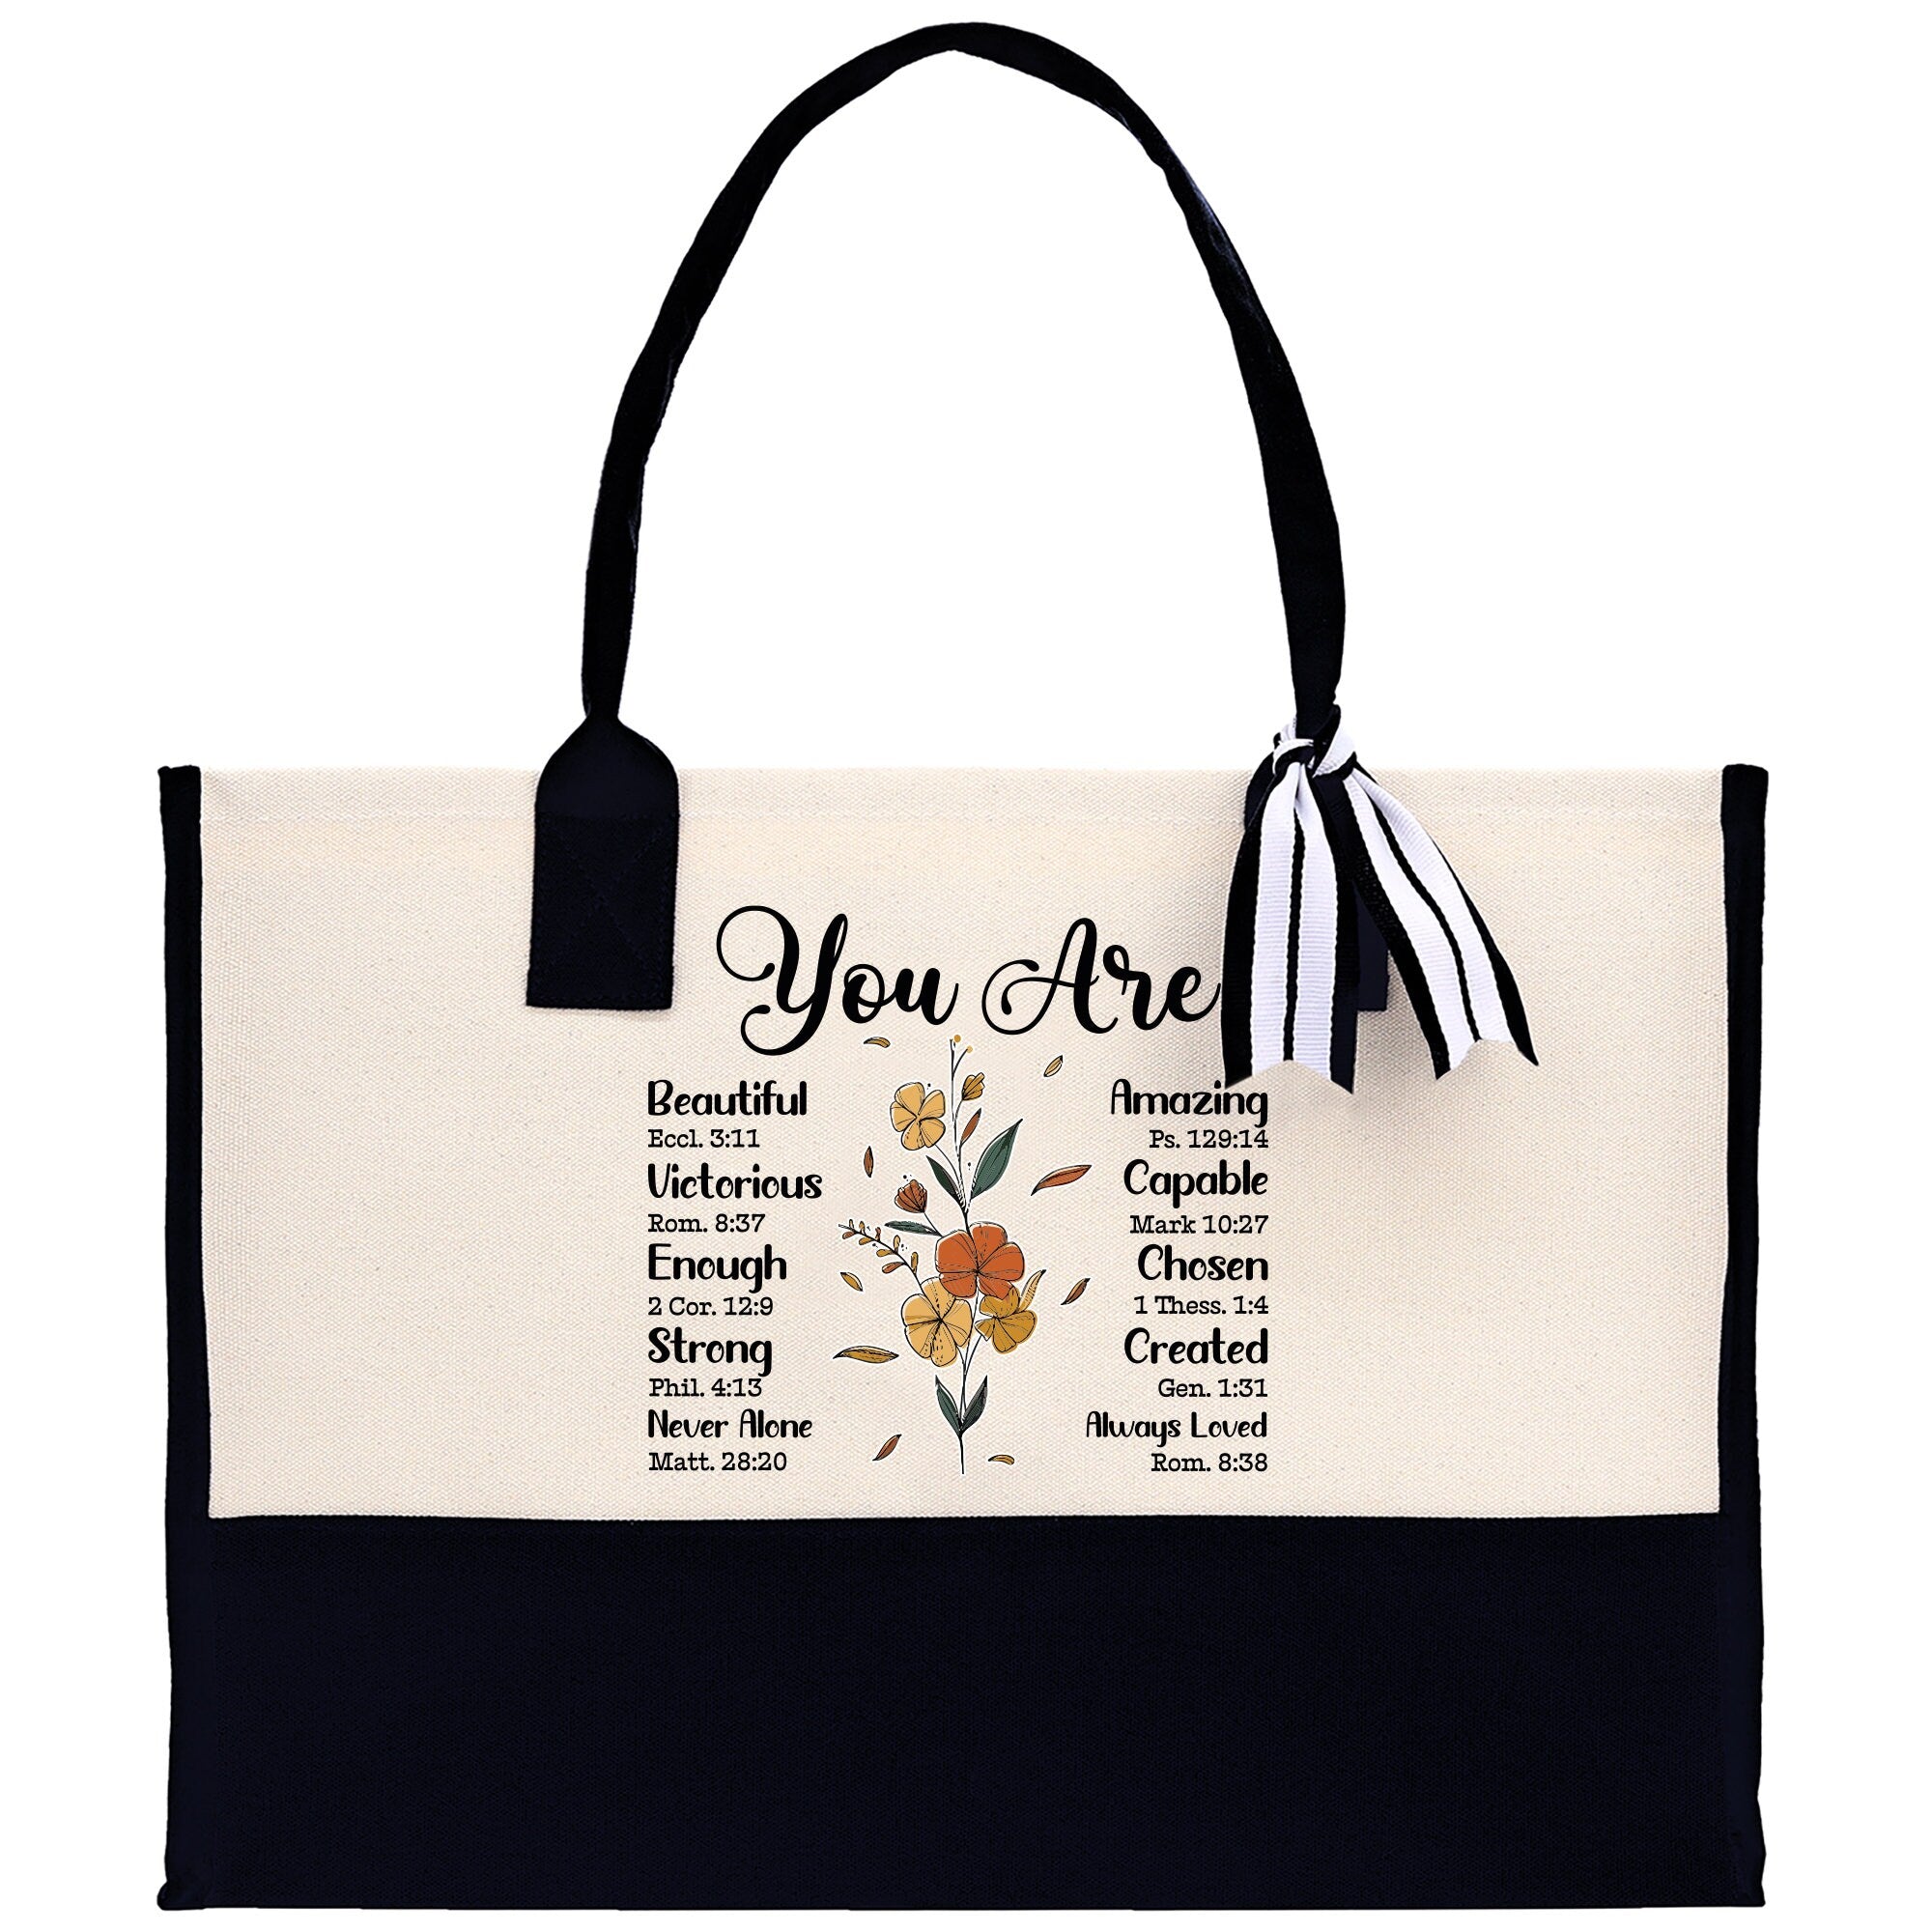 a black and white tote bag with the words you are surrounded by flowers